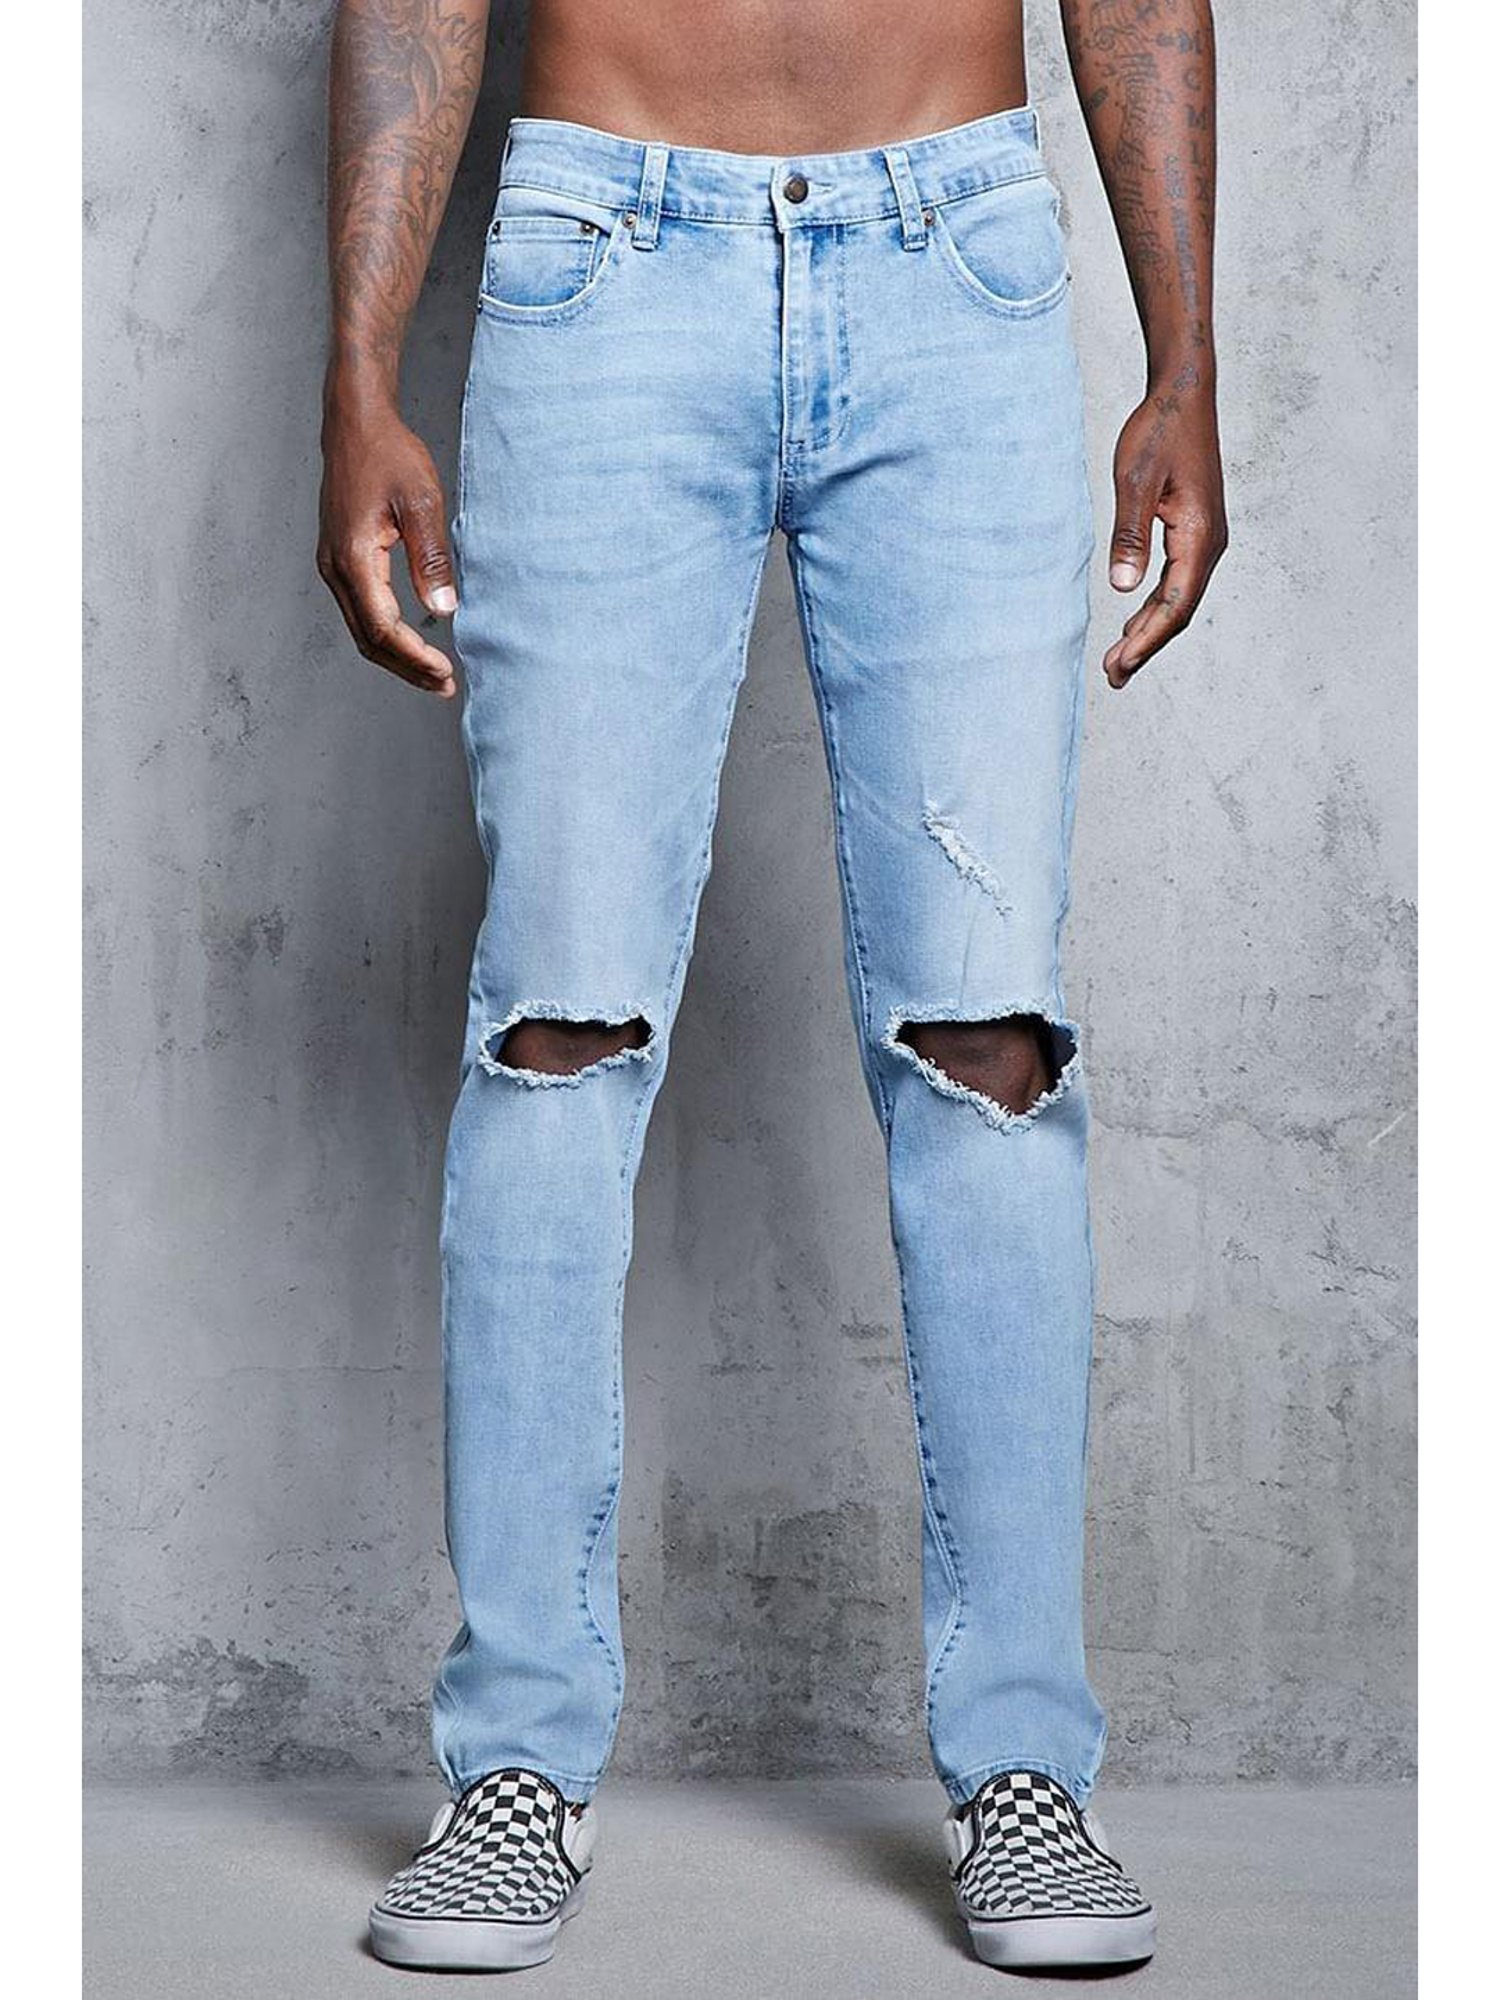 Forever 21 Classic Distressed Boyfriend Jeans, $24 | Forever 21 | Lookastic